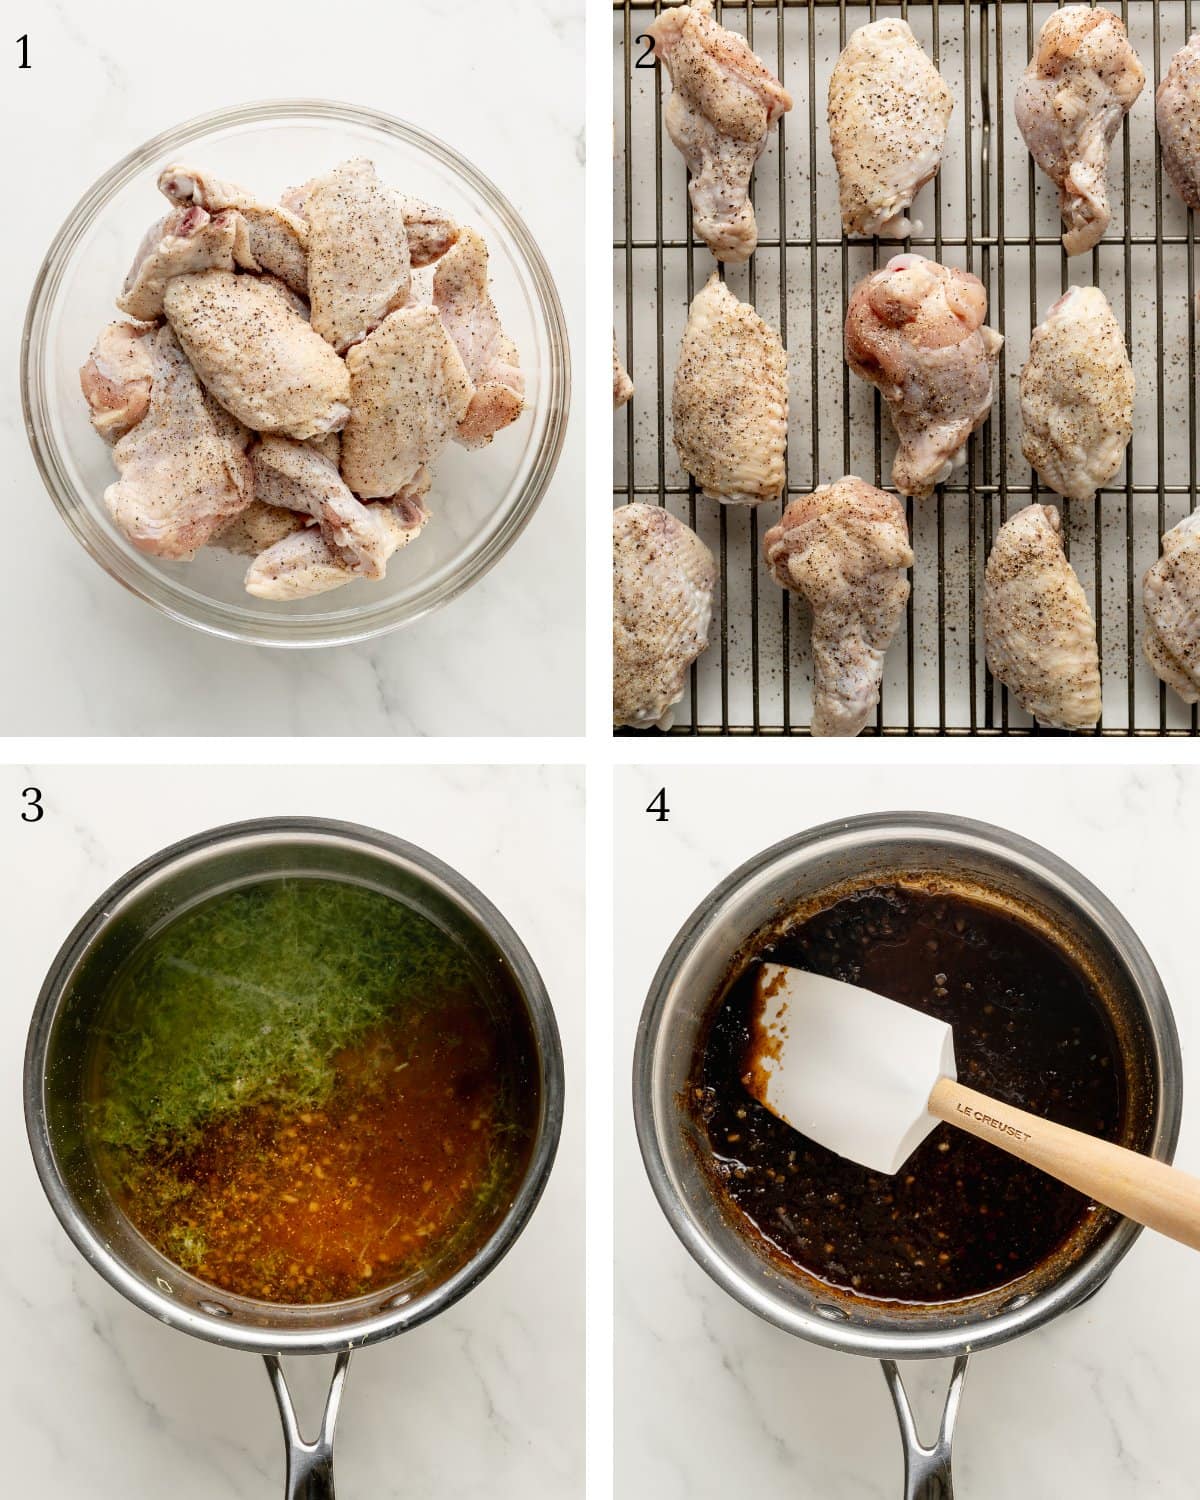 Step showing how to make tequila lime chicken wings. A large bowl with chicken wings, coated in avocado oil, and seasonings. Chicken wings are then placed on a lined baking rack. In a saucepan in the tequila lime glaze, which is reduced until thickened. 